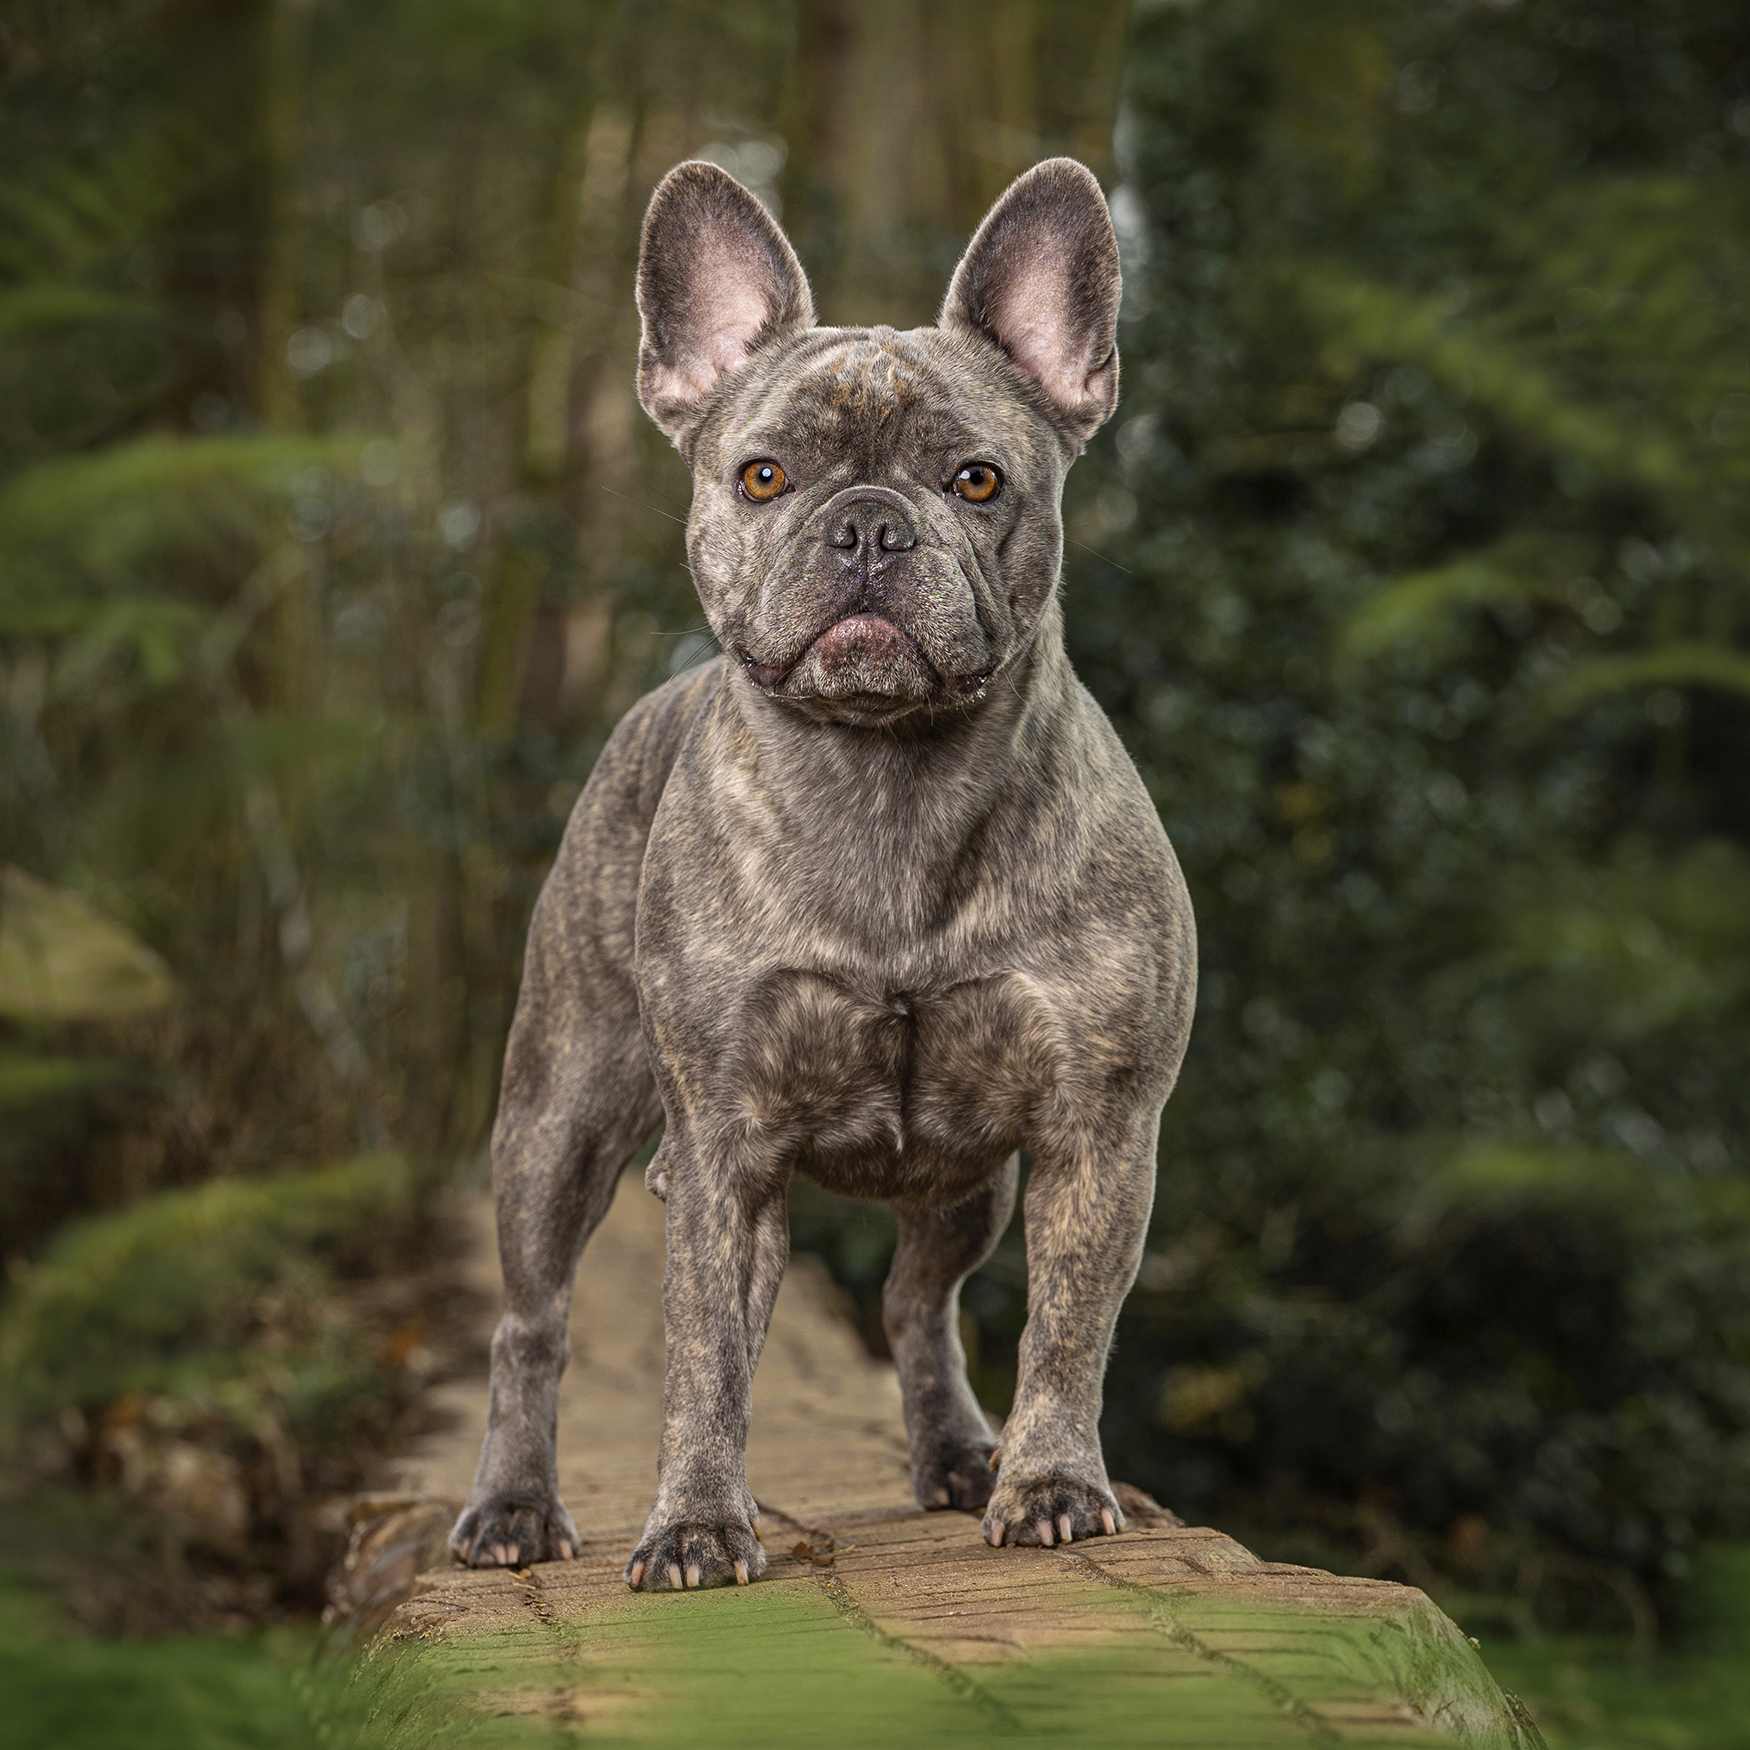 Adorable puppy photography from Bedfordshire Pet photographer Adrian Bullers